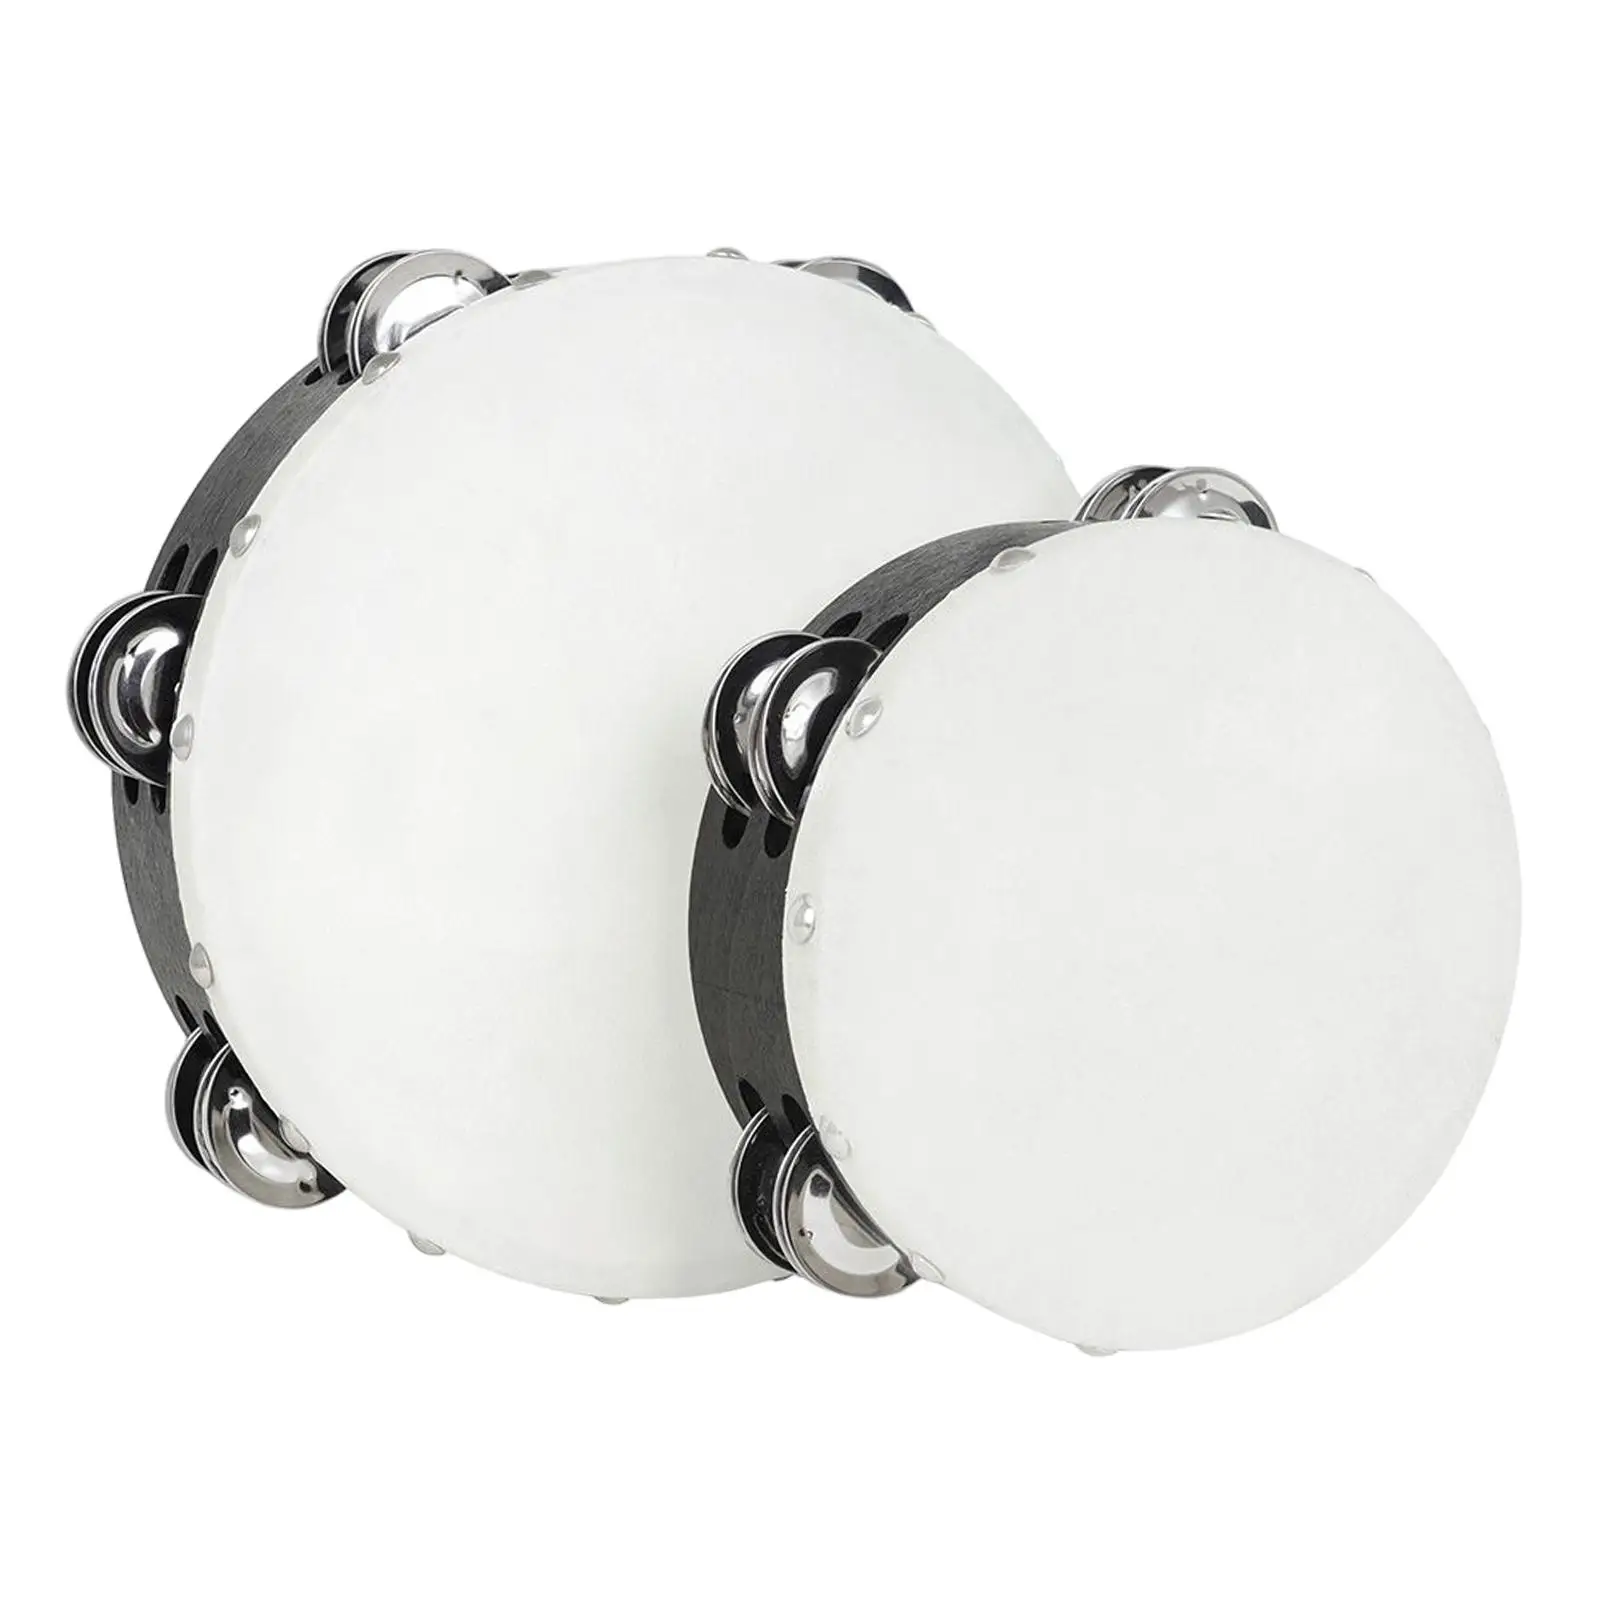 2x Manual Wooden Tambourine Hand Percussion Hand Held Drum for Family Adults